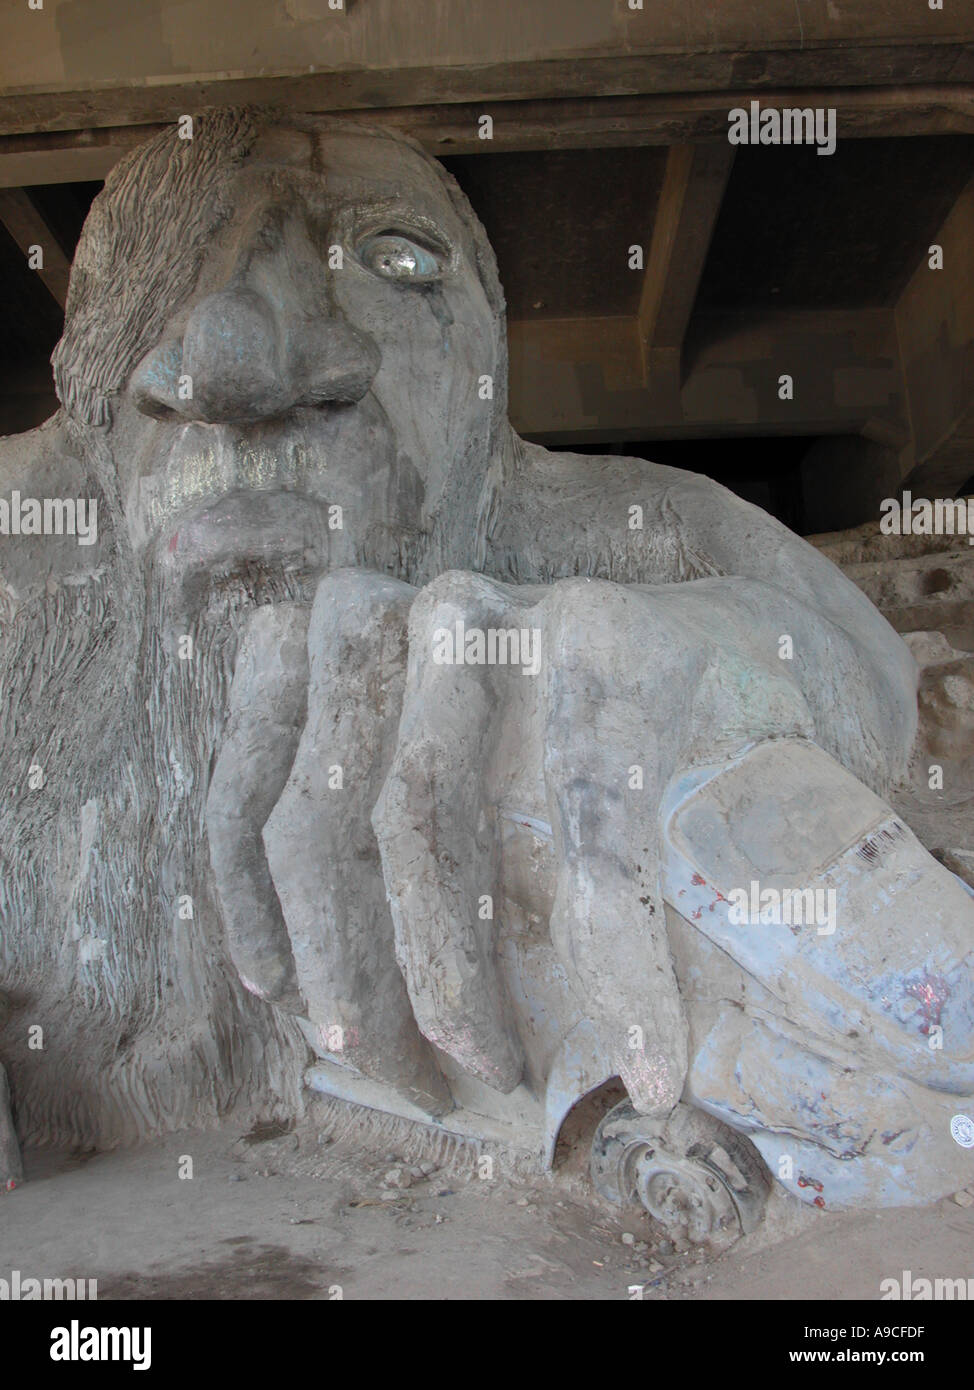 This is the Fremont Troll under the Aurora Bridge of highway 99, north of Seattle Washington USA. Stock Photo